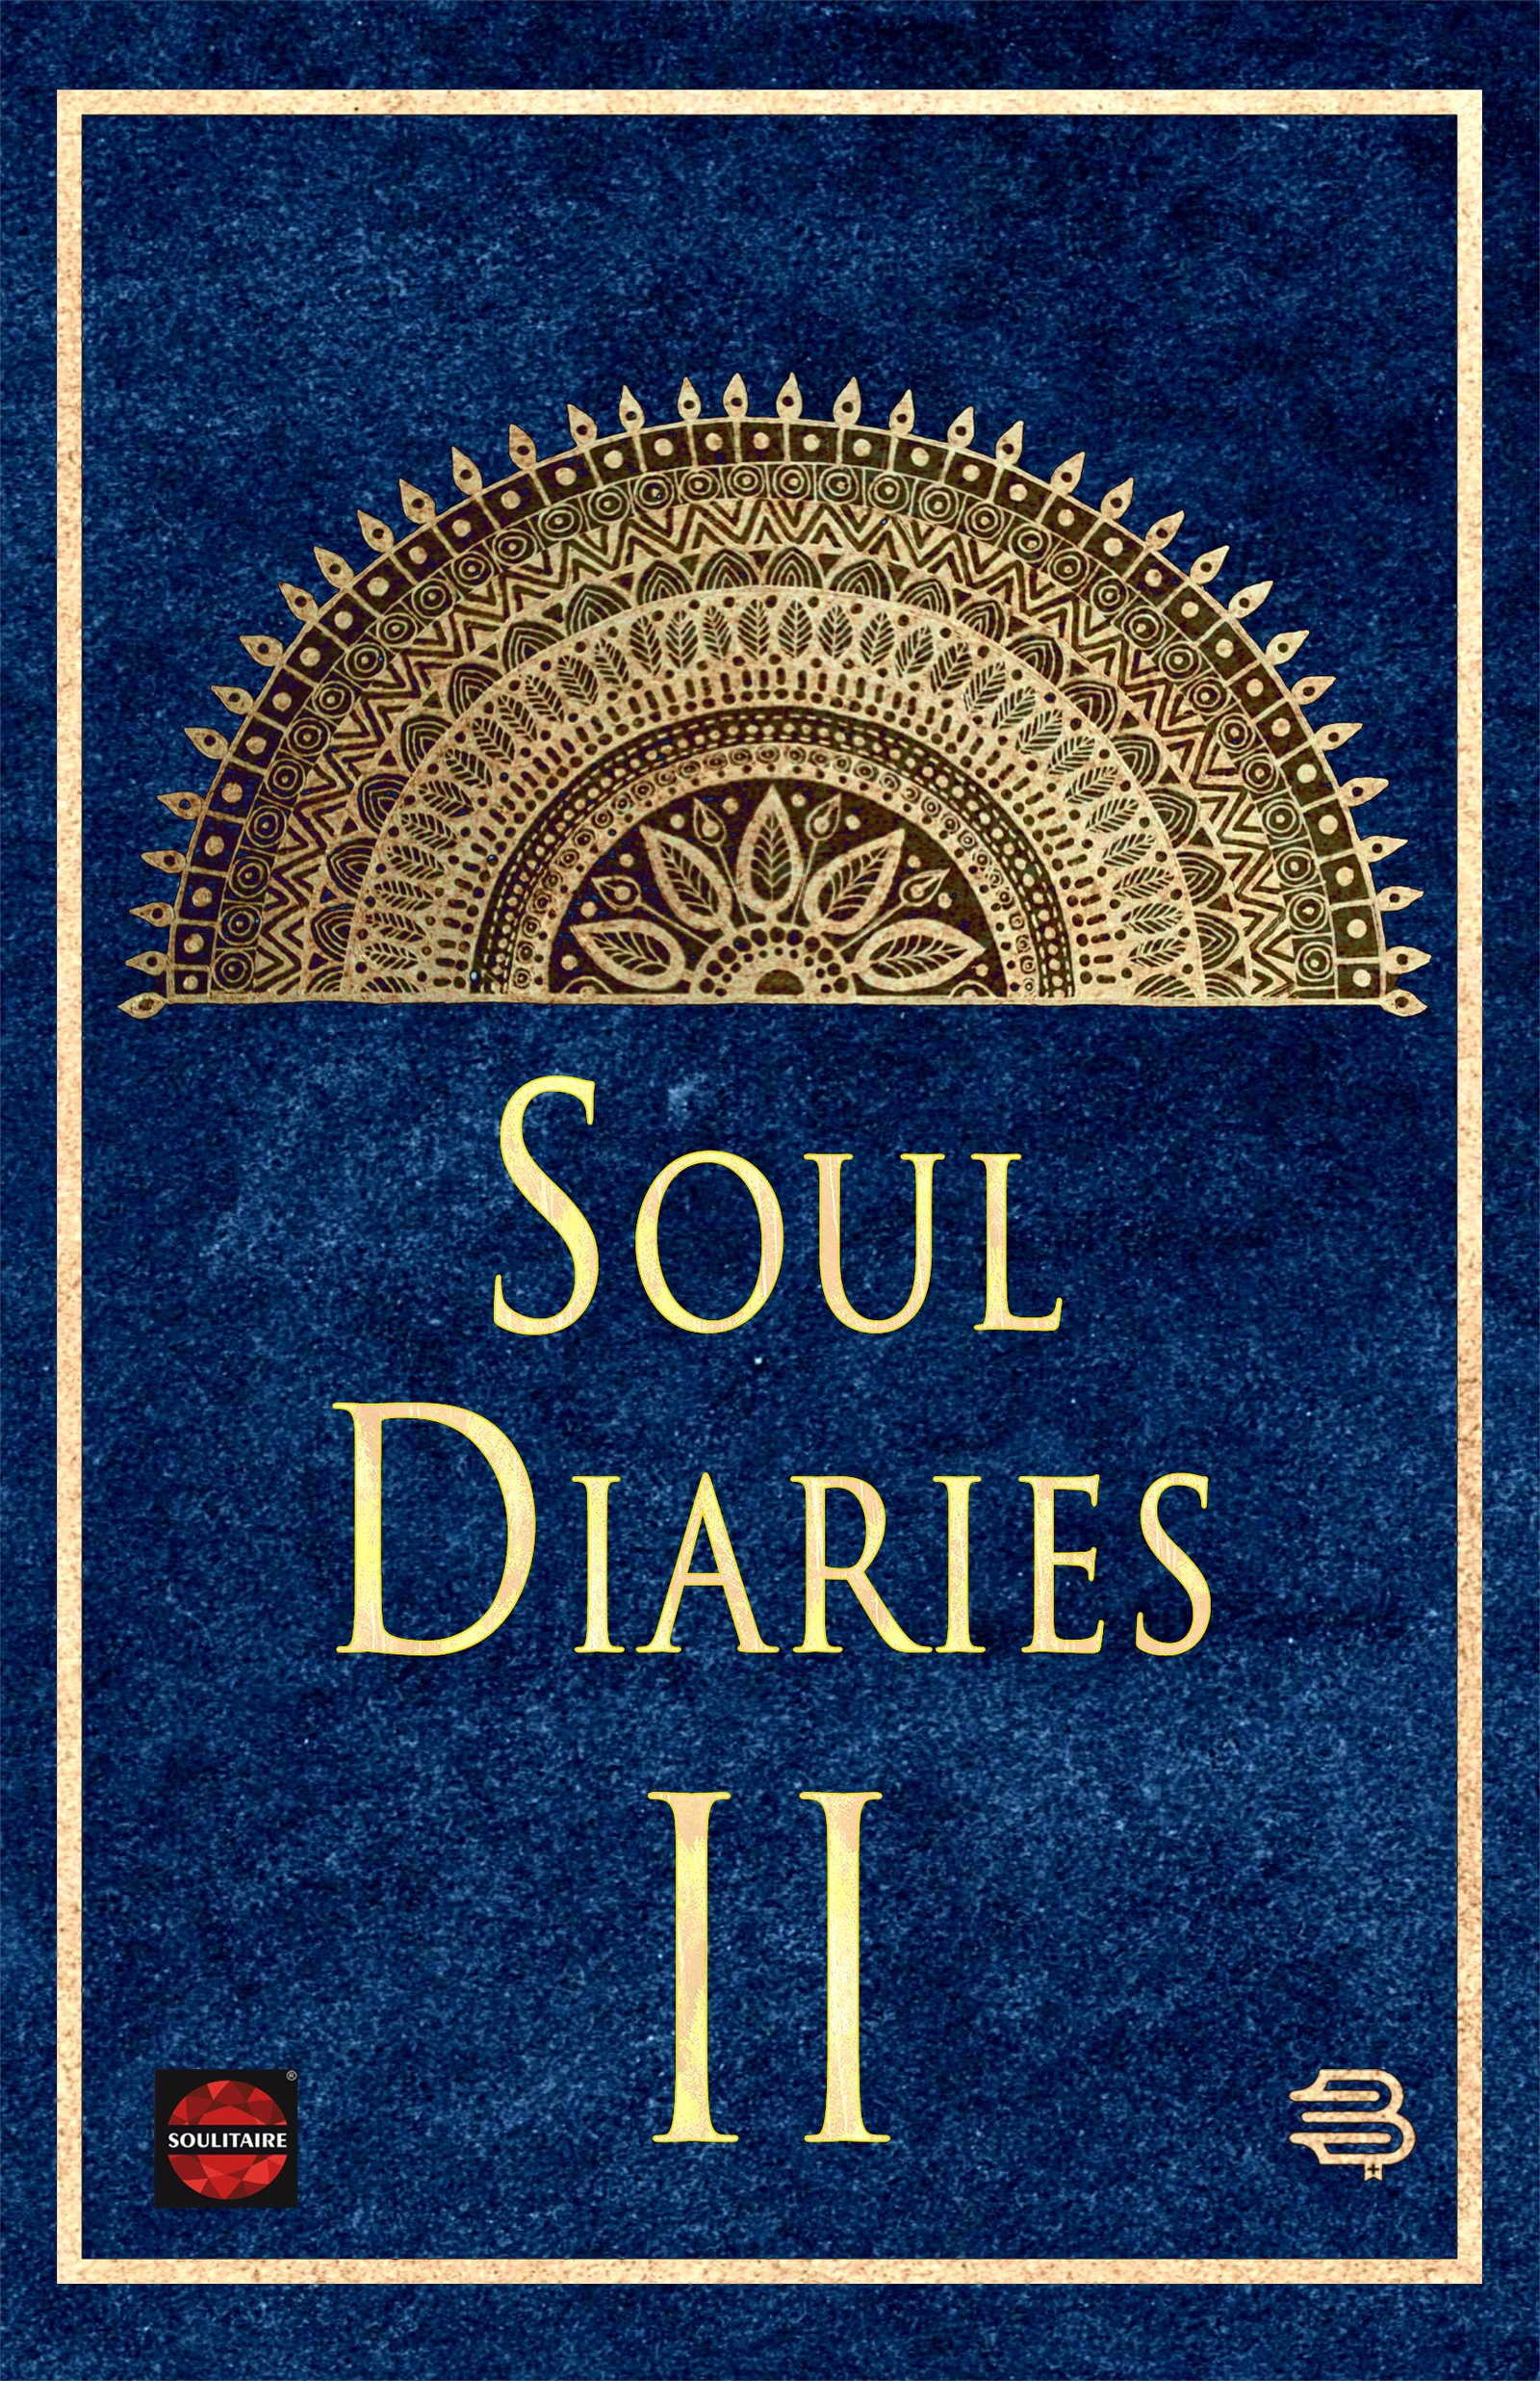 SOUL DIARIES II by (Soulitaire)